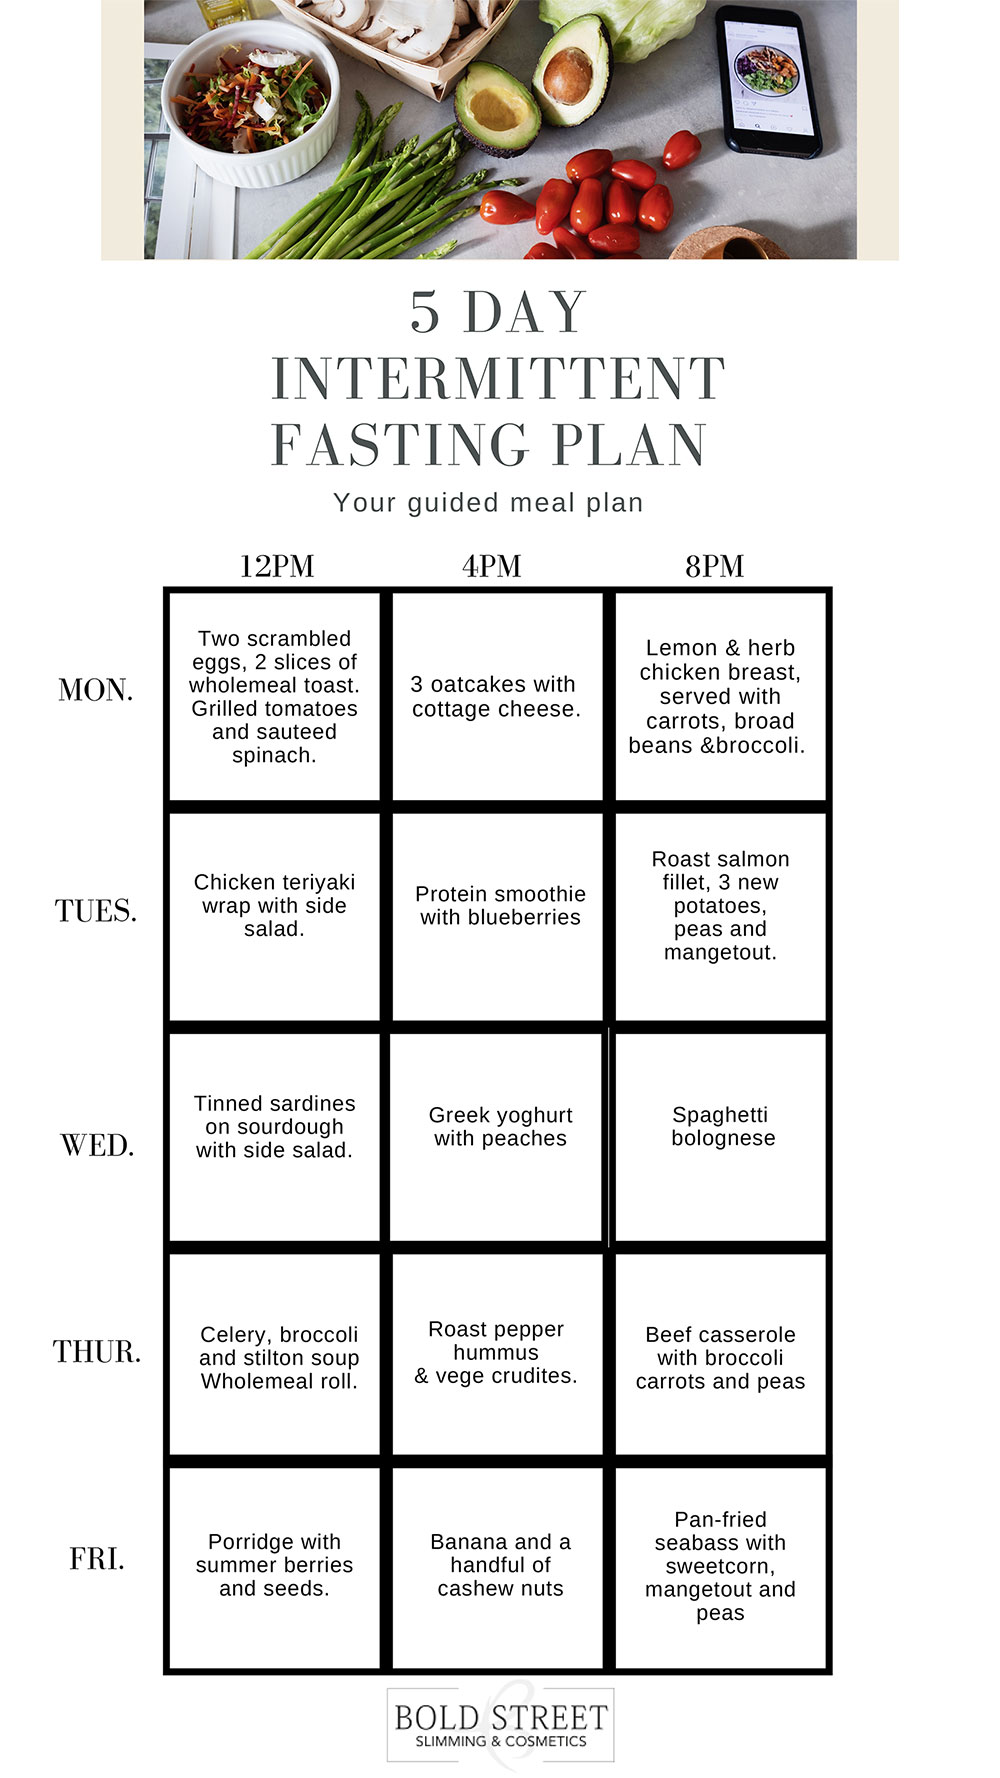 5 Day Intermittent Fasting Plan